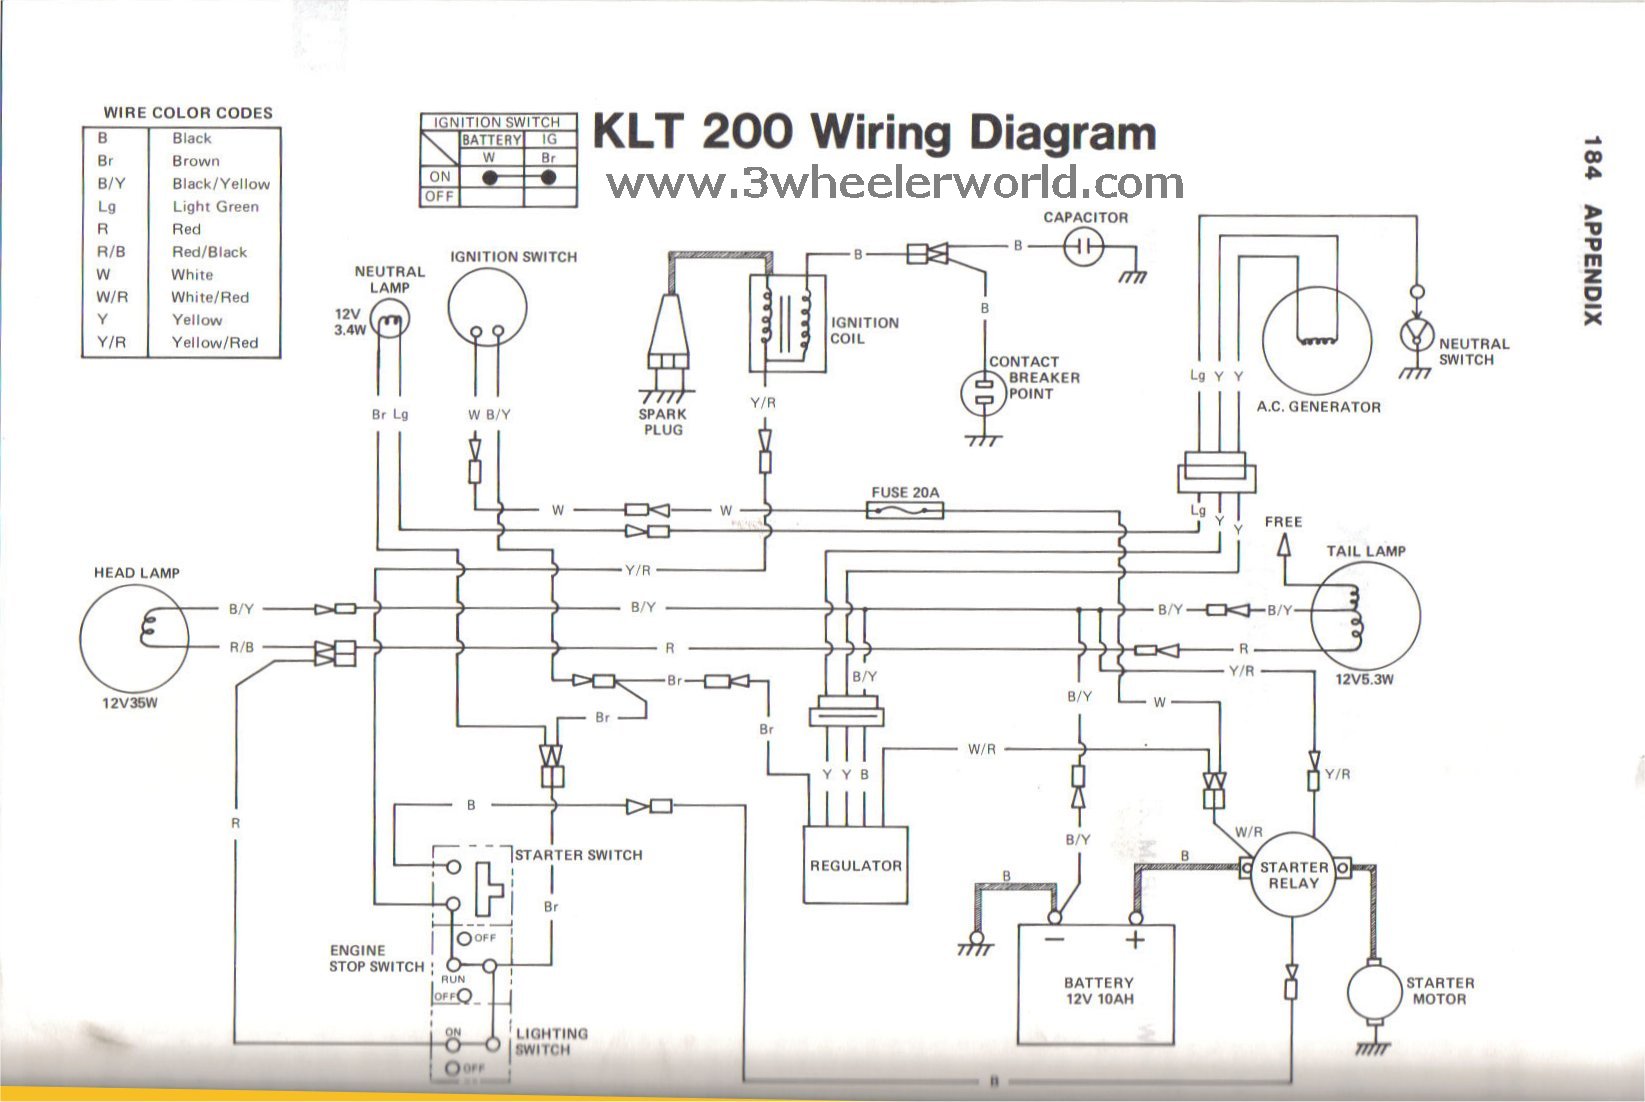 DIAGRAM] Cb 200 Wiring Diagram FULL Version HD Quality Wiring Diagram -  MEDIAGRAME.LADOLCEVALLE.IT